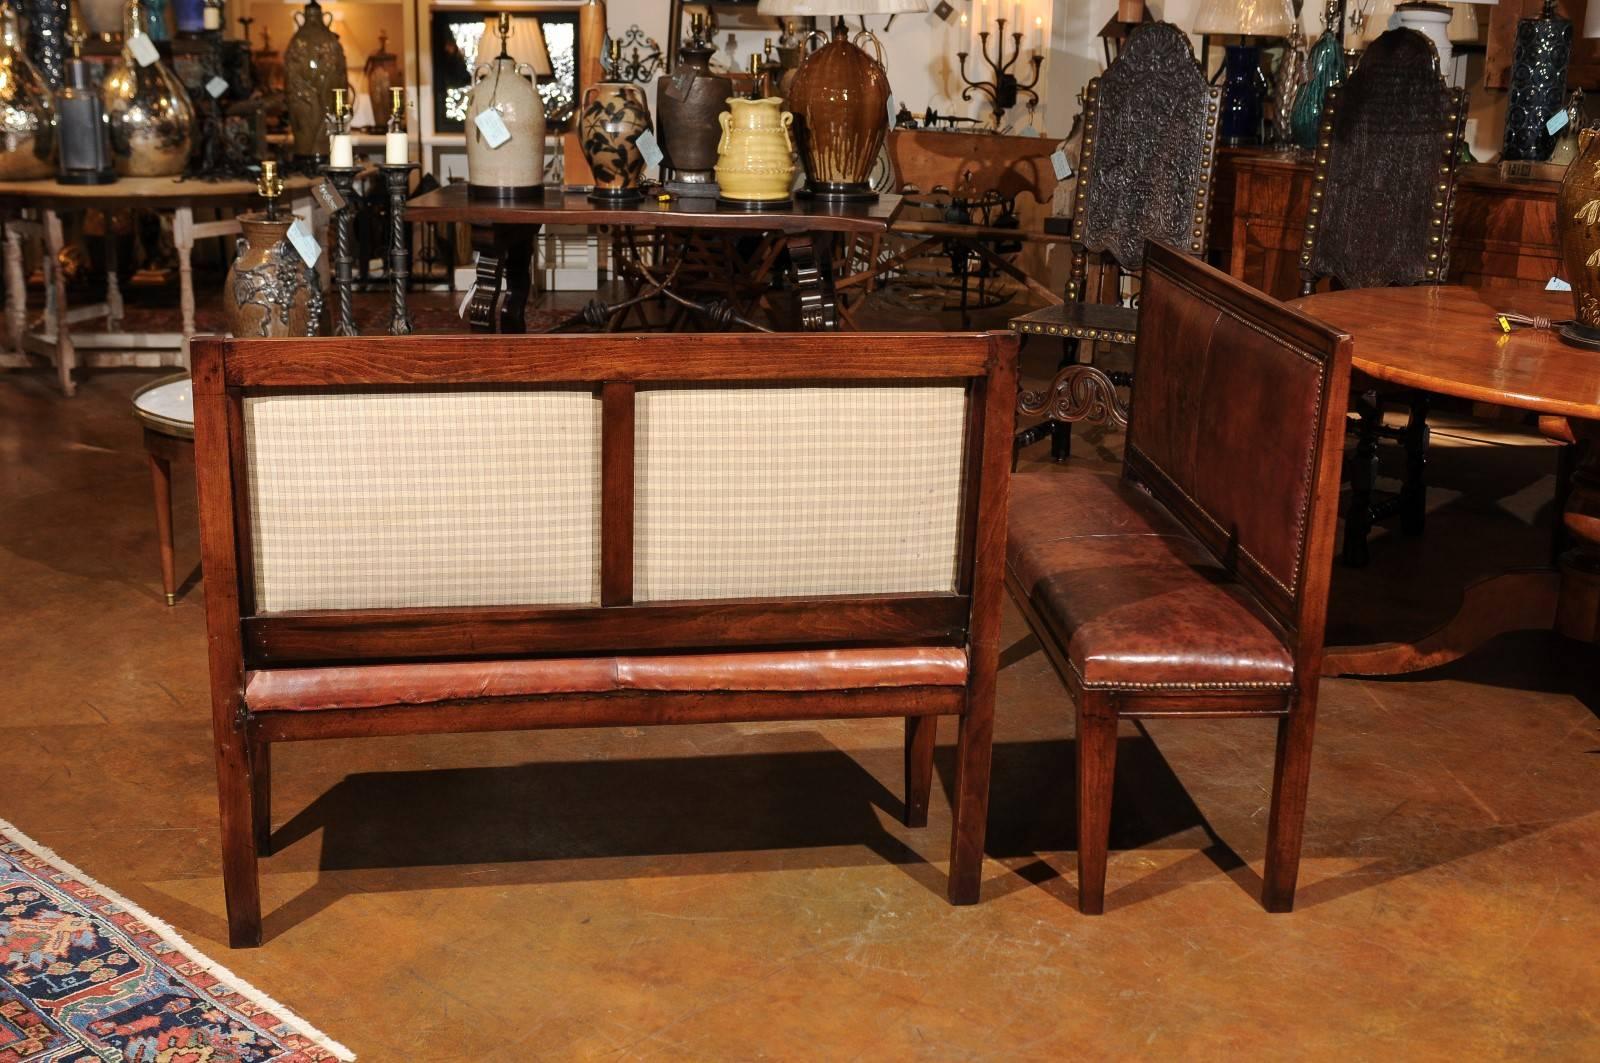 English 19th Century Mahogany and Leather Bench with Nail Head Trim - 1 avail. 5